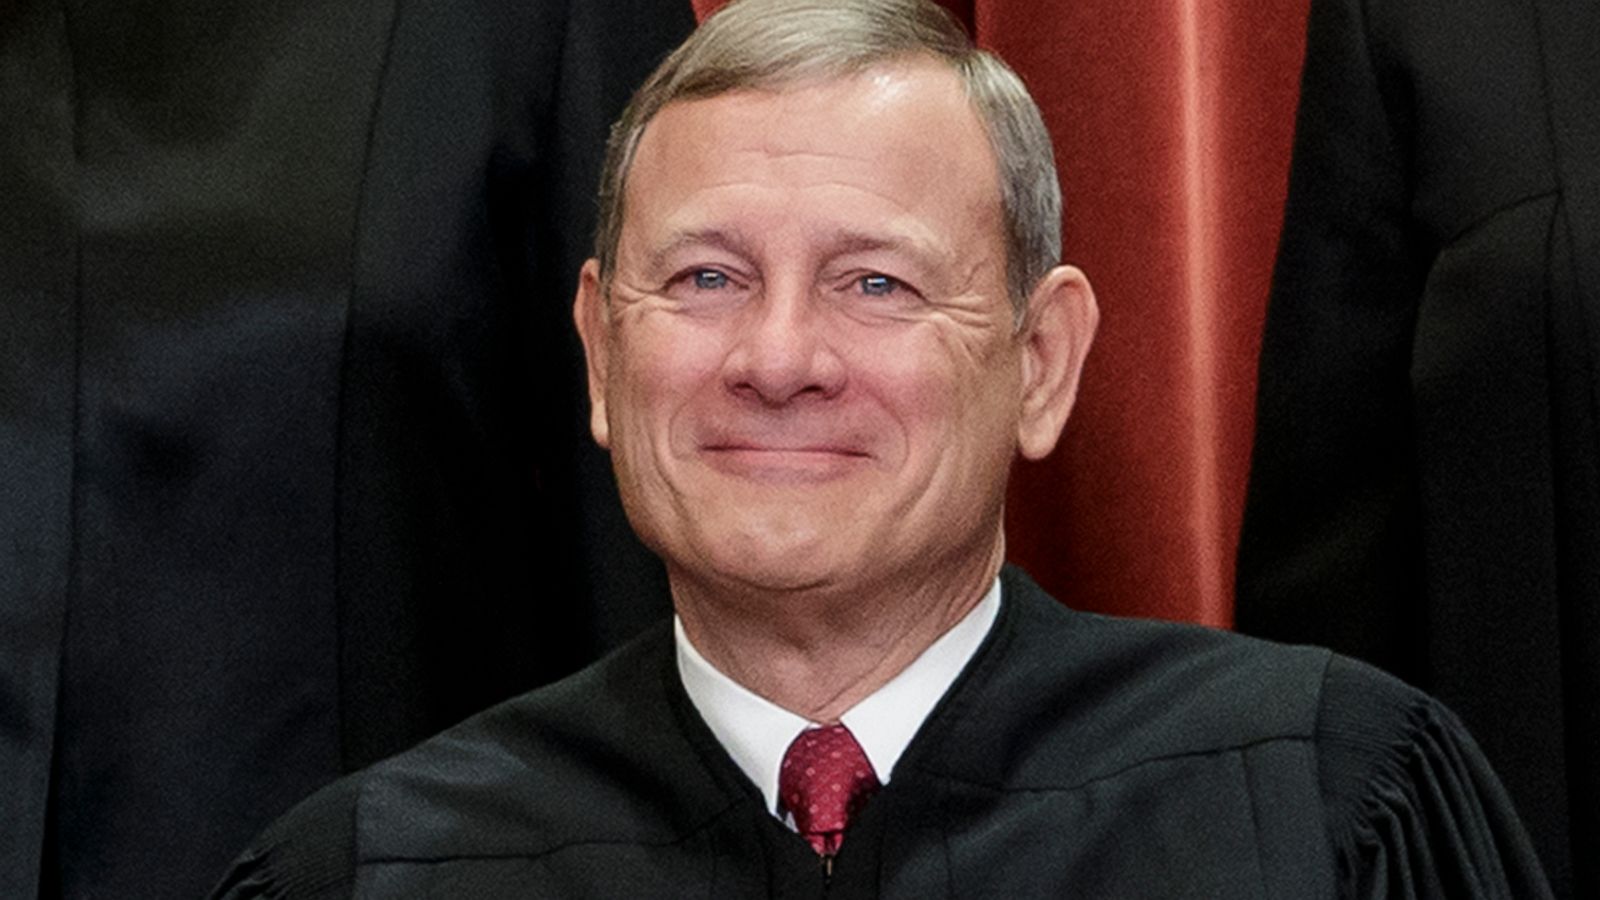 Chief Justice John Roberts straddles Supreme Court's left and right